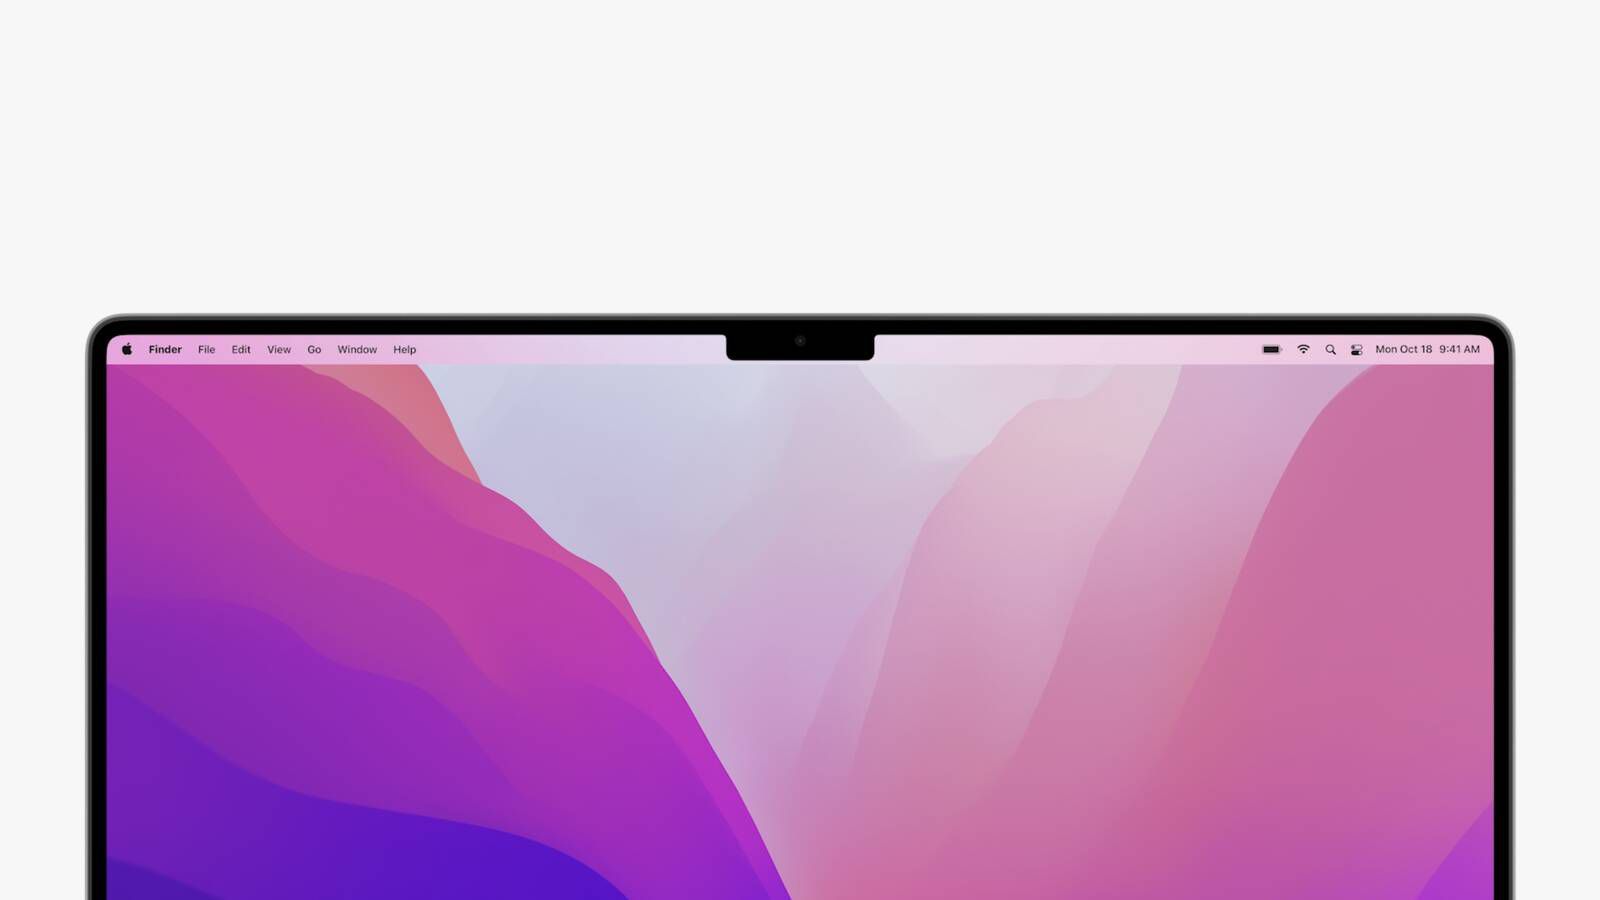 Video Highlights Menu Bar Behavior in Apps Not Updated to Accommodate MacBook Pro Notch